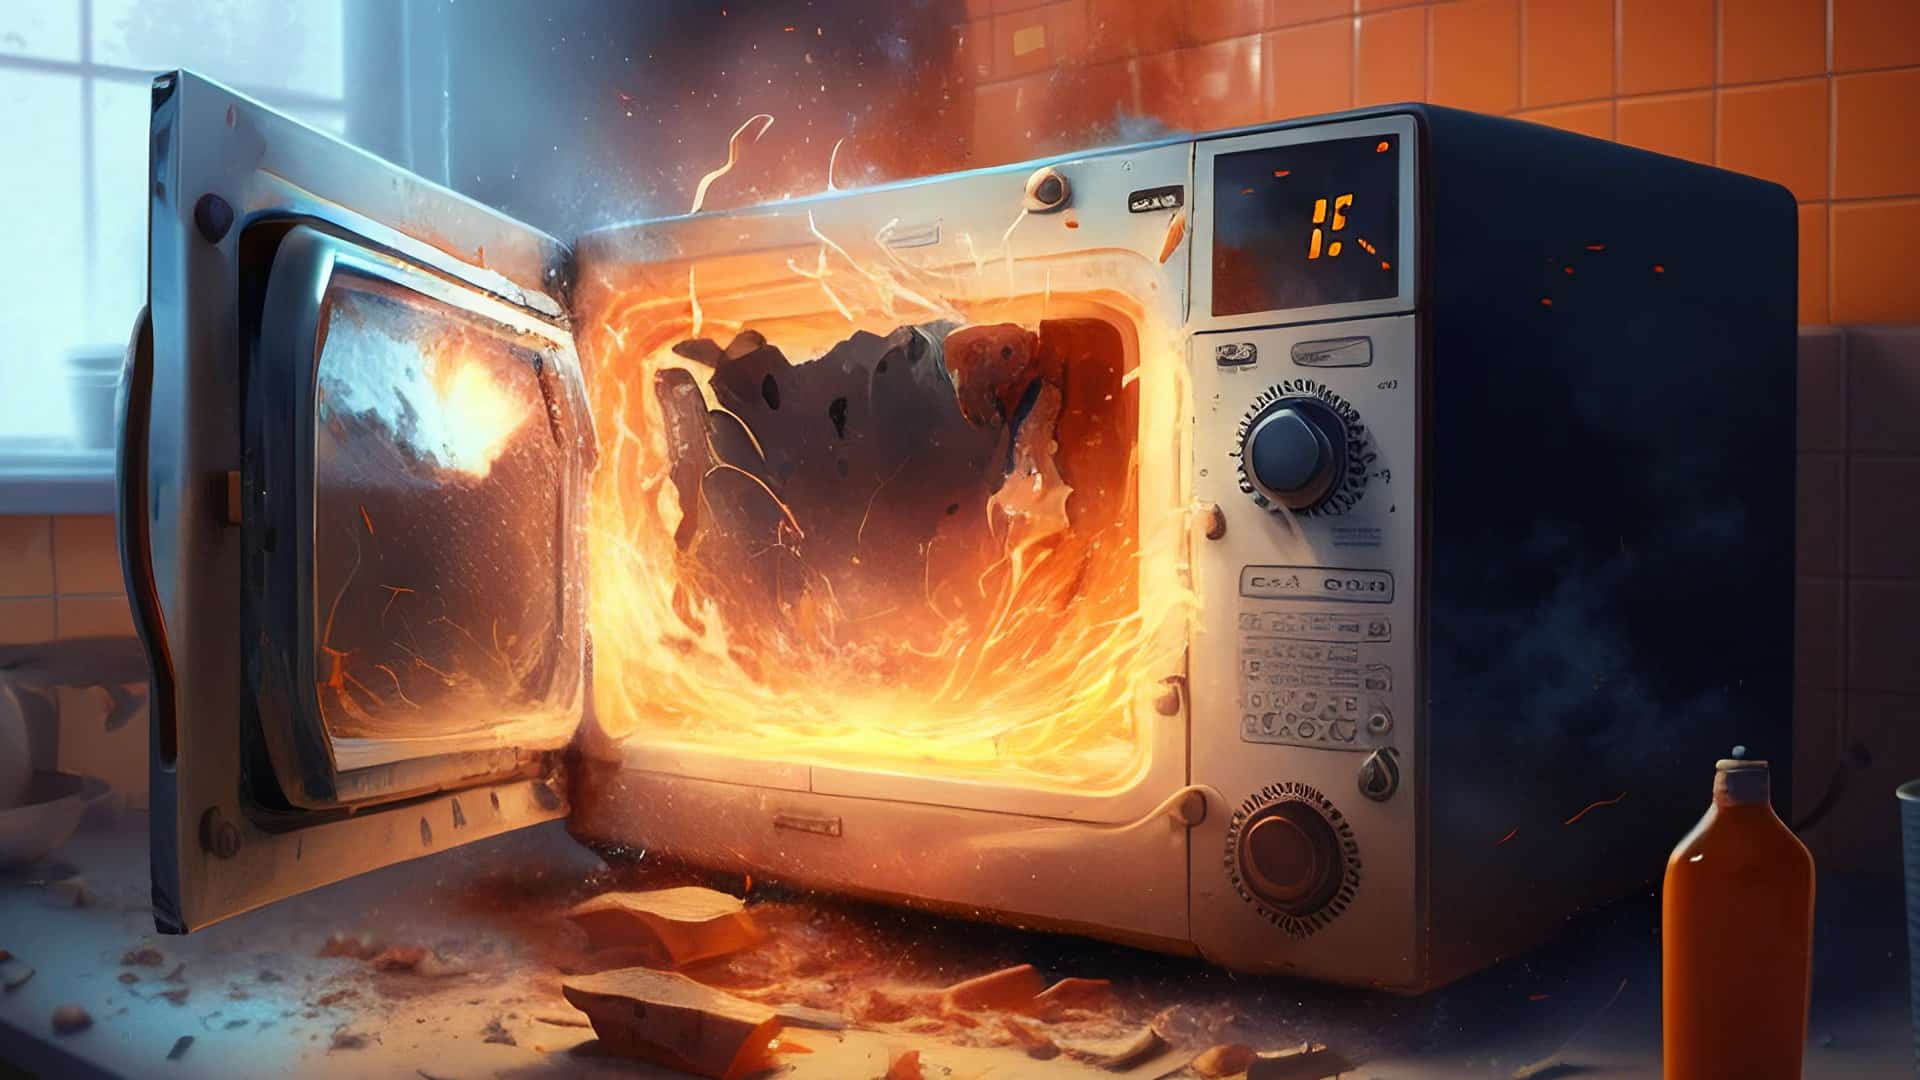 Featured image for “Why Is My Microwave Sparking?”